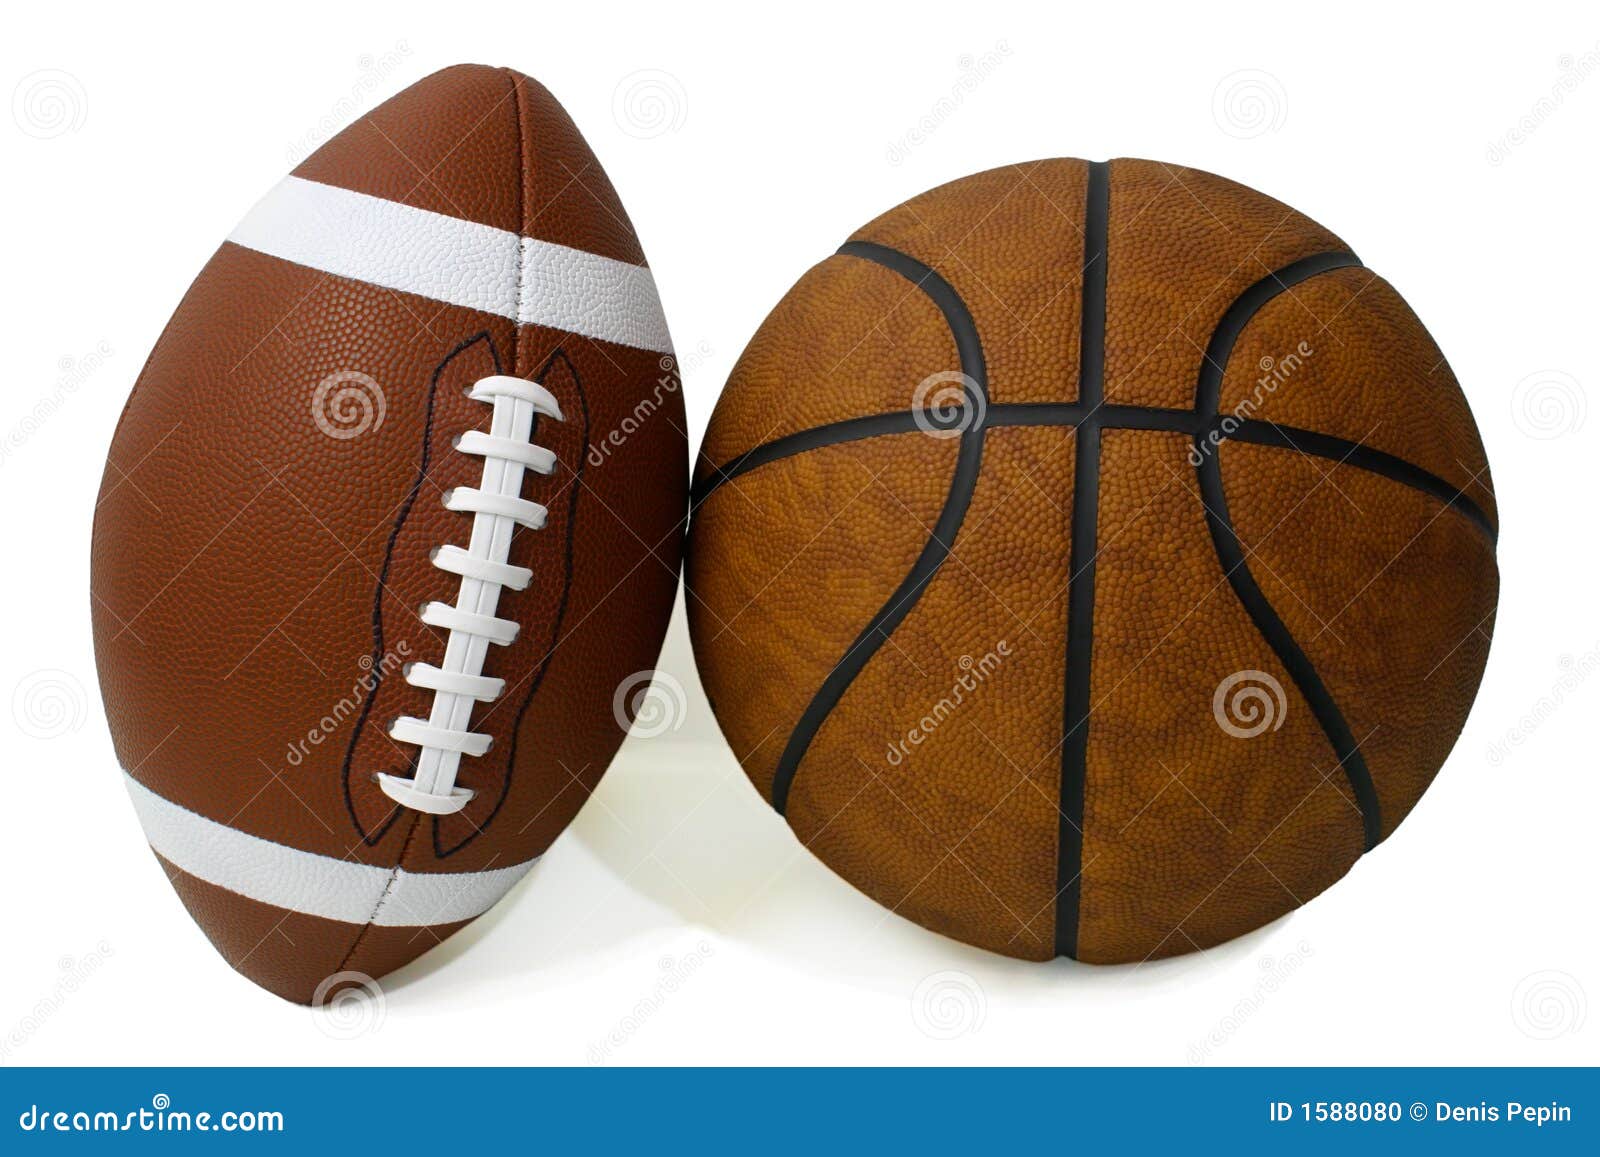 American Football and Basketball Stock Photo - Image of activity